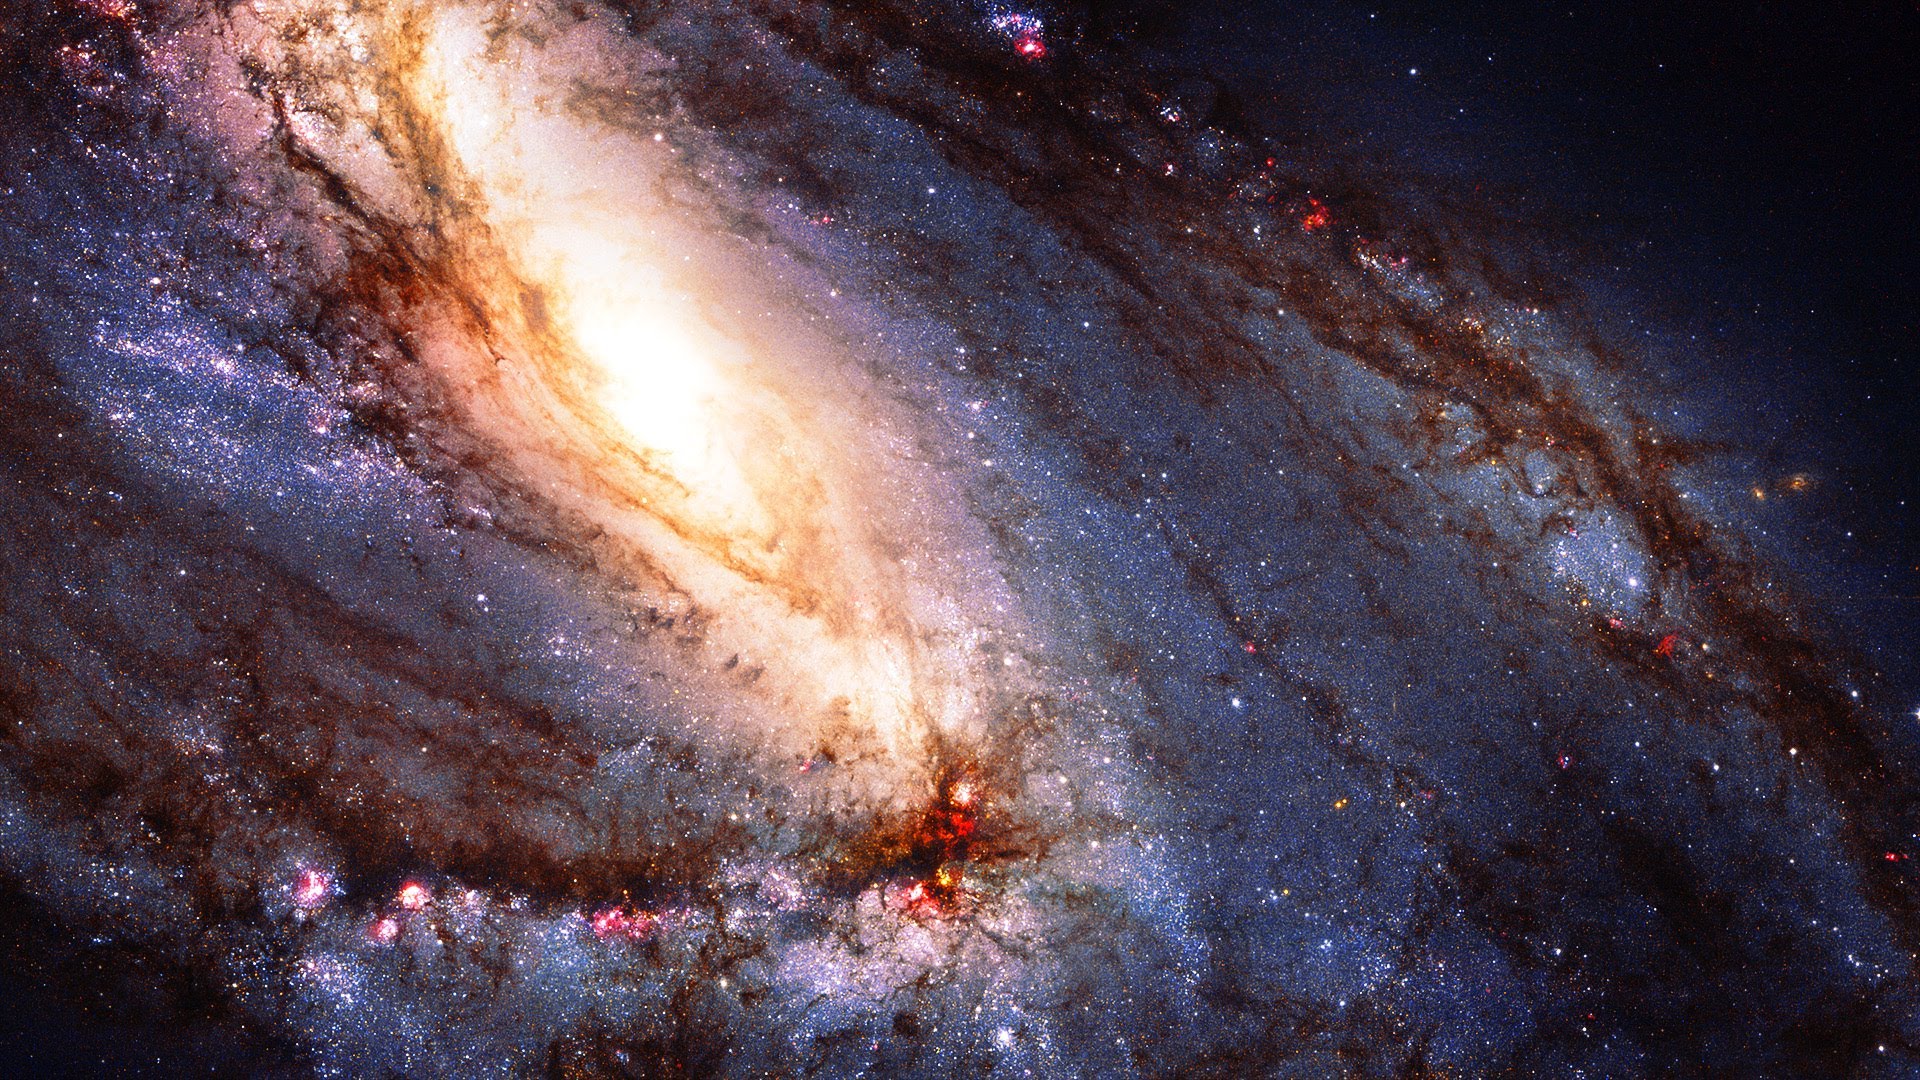 hubble space telescope images of hand 4k